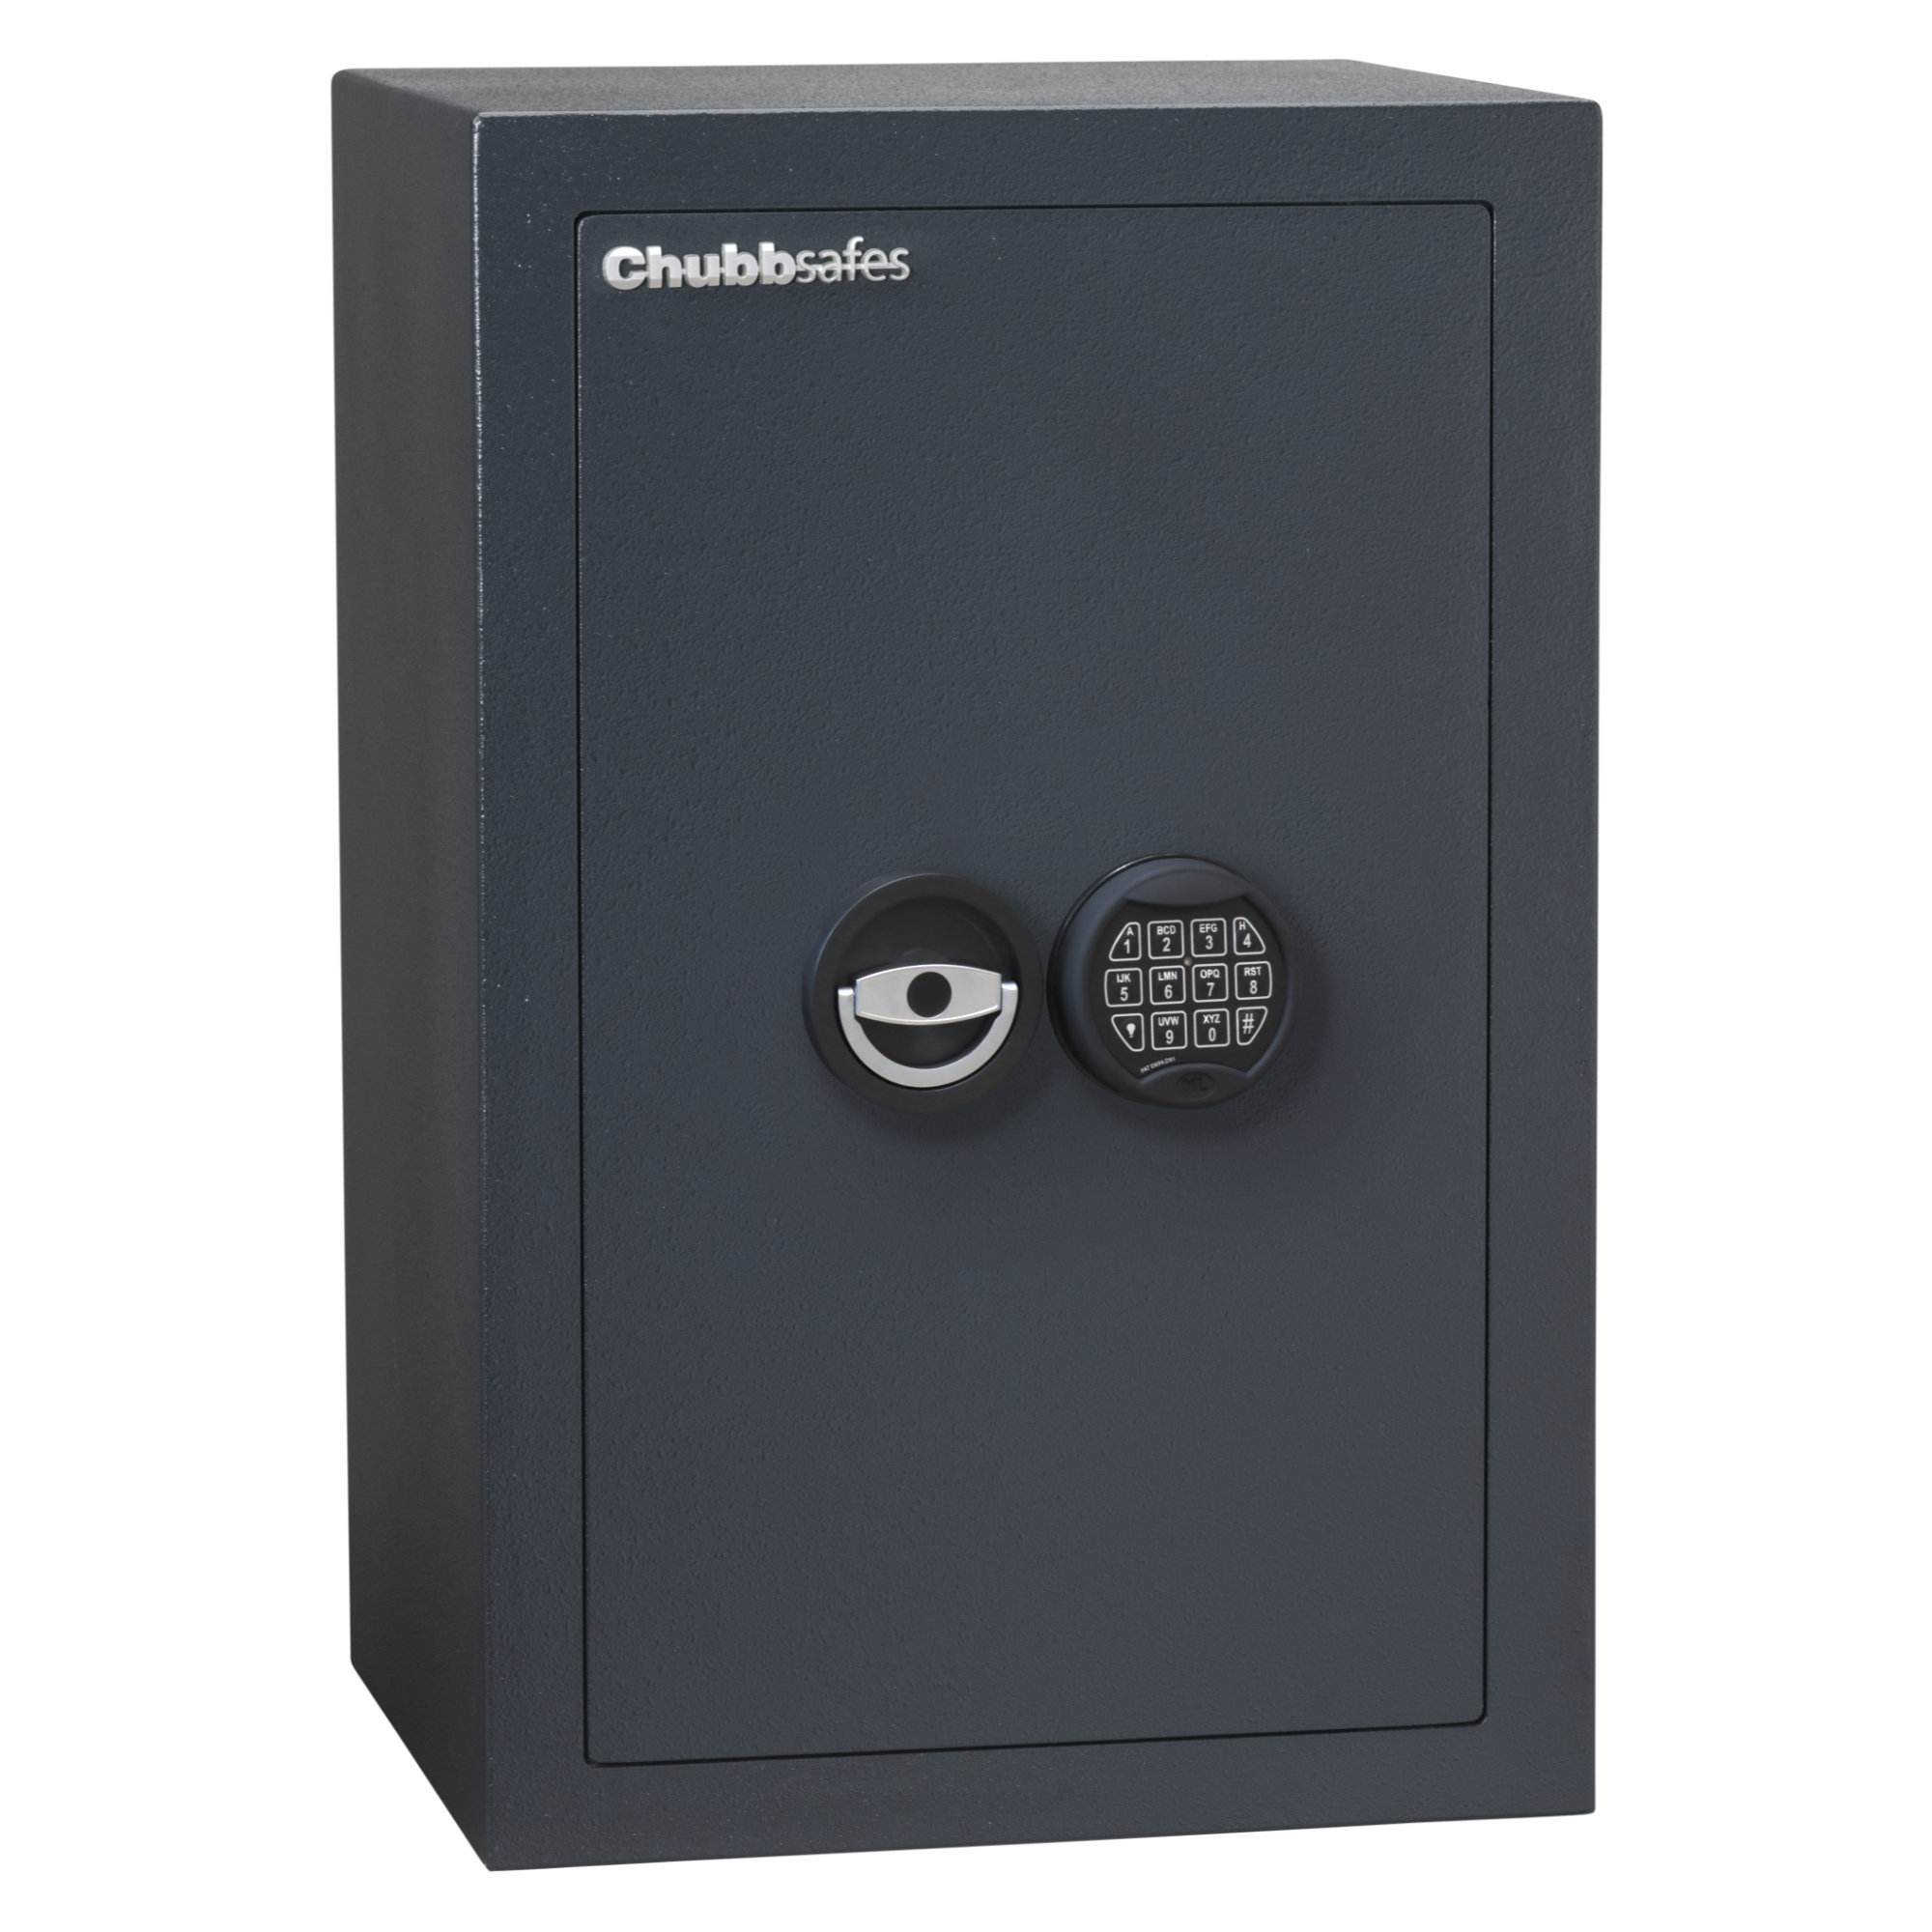 This Chubbsafes euro grade 0 size 65e is an office safe or security safe for the home with high security electronic lock.